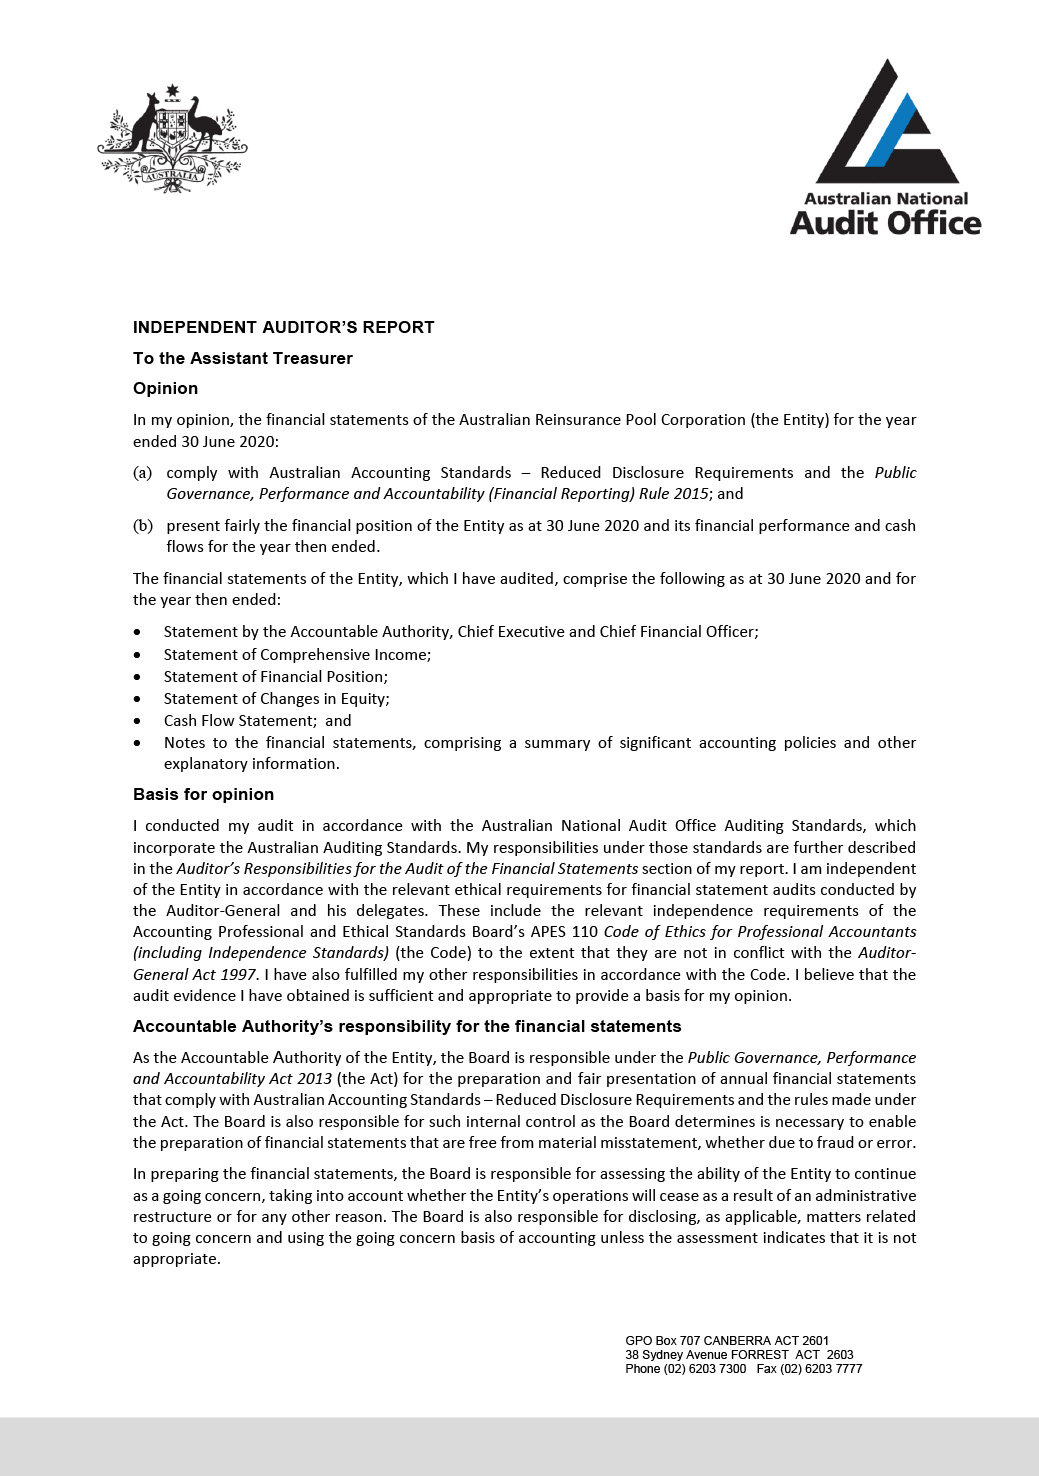 Independent auditor's report page 1